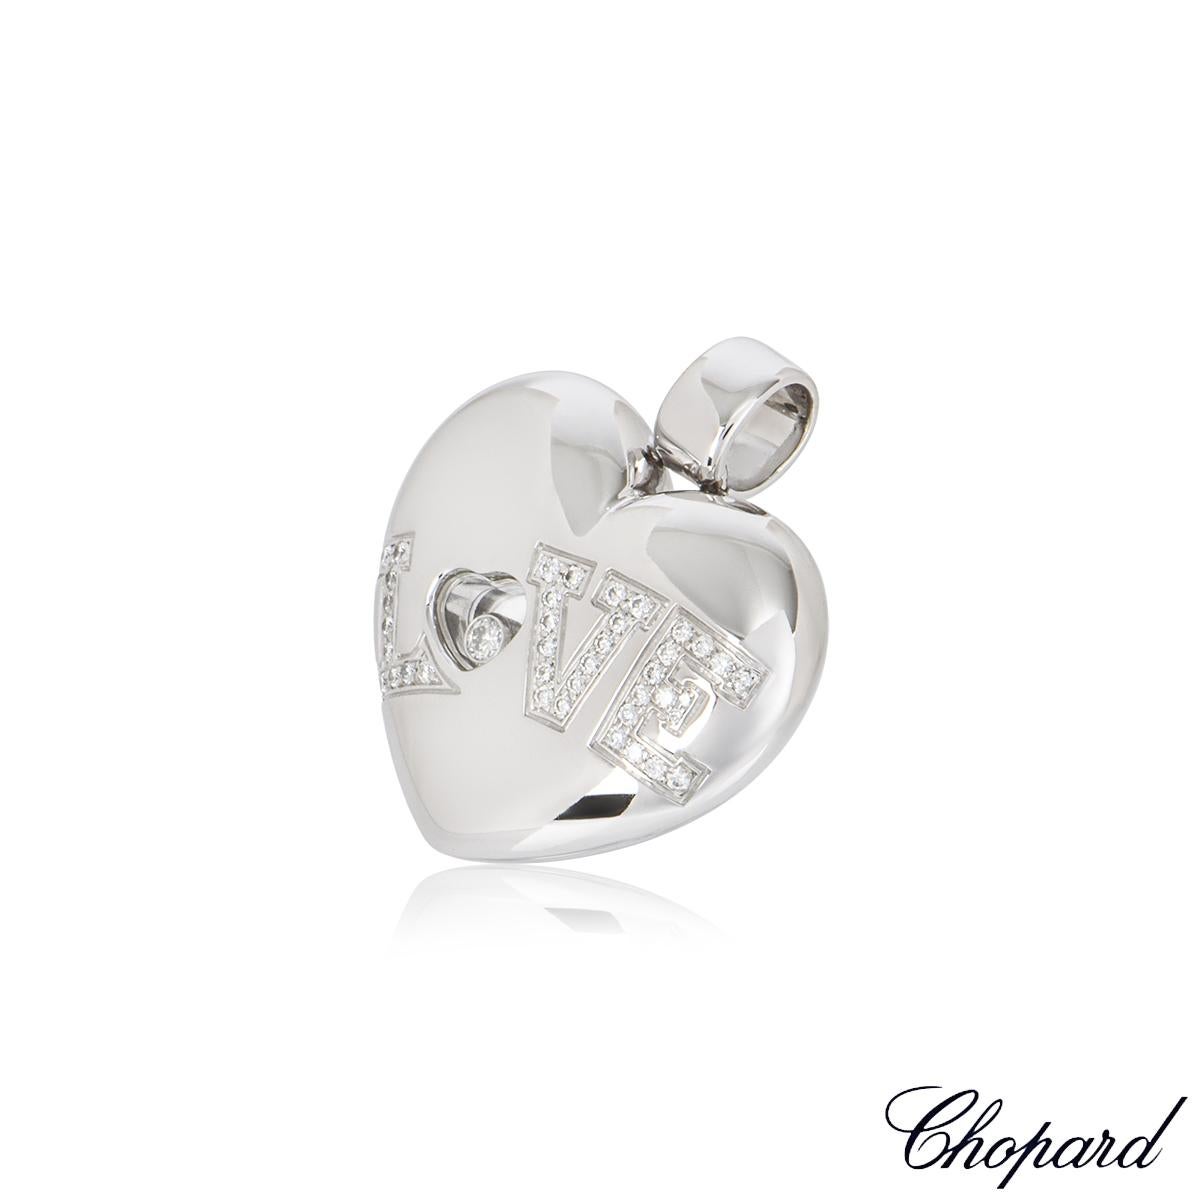 A beautiful Chopard 18k white gold diamond heart pendant from the Happy Diamonds collection. The heart pendant comprises of one floating round brilliant cut diamond encased behind the signature Chopard signed glass, weighing 0.04ct. Complemented